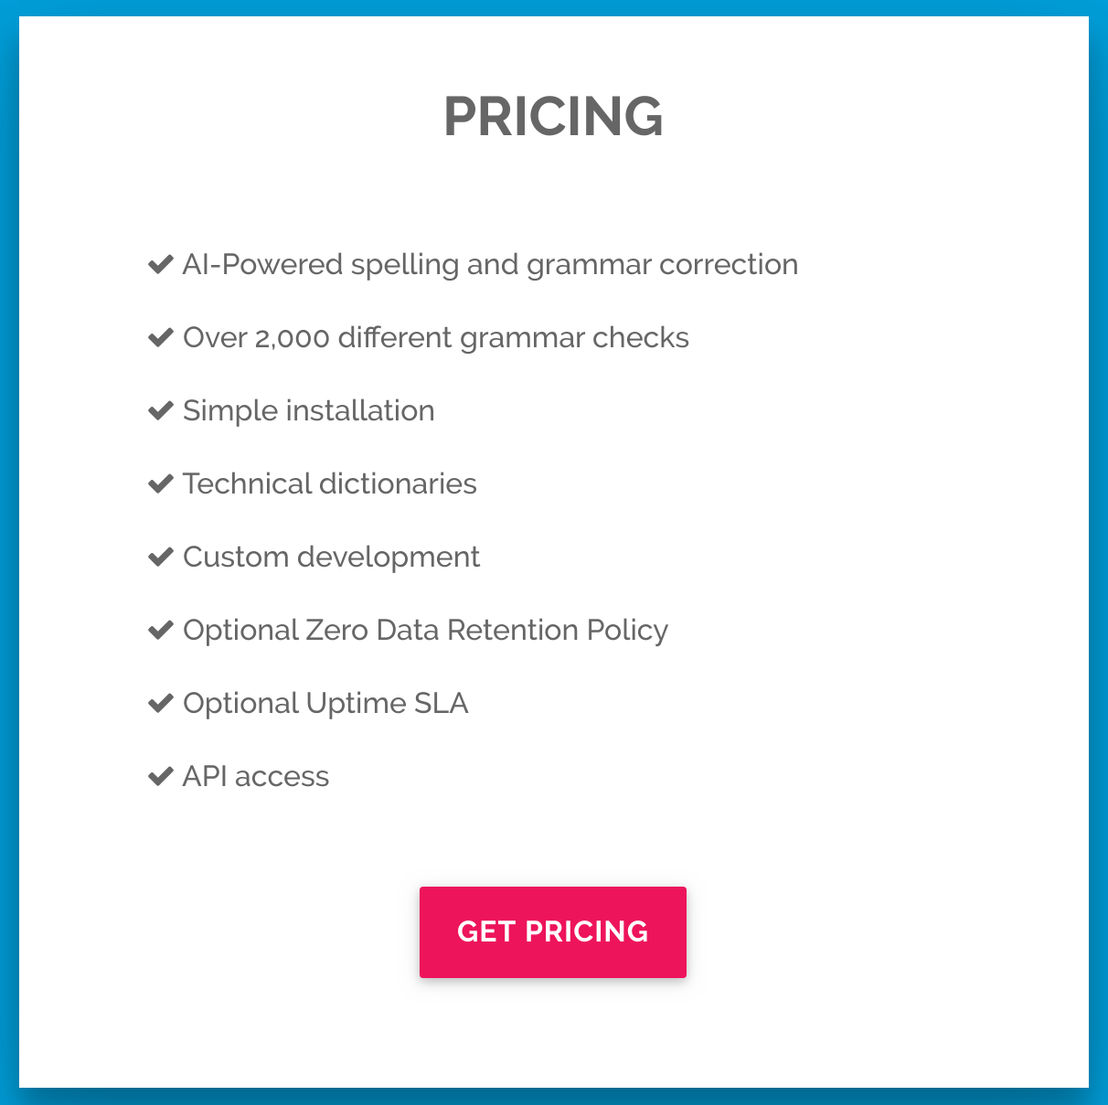 Perfect Tense Pricing